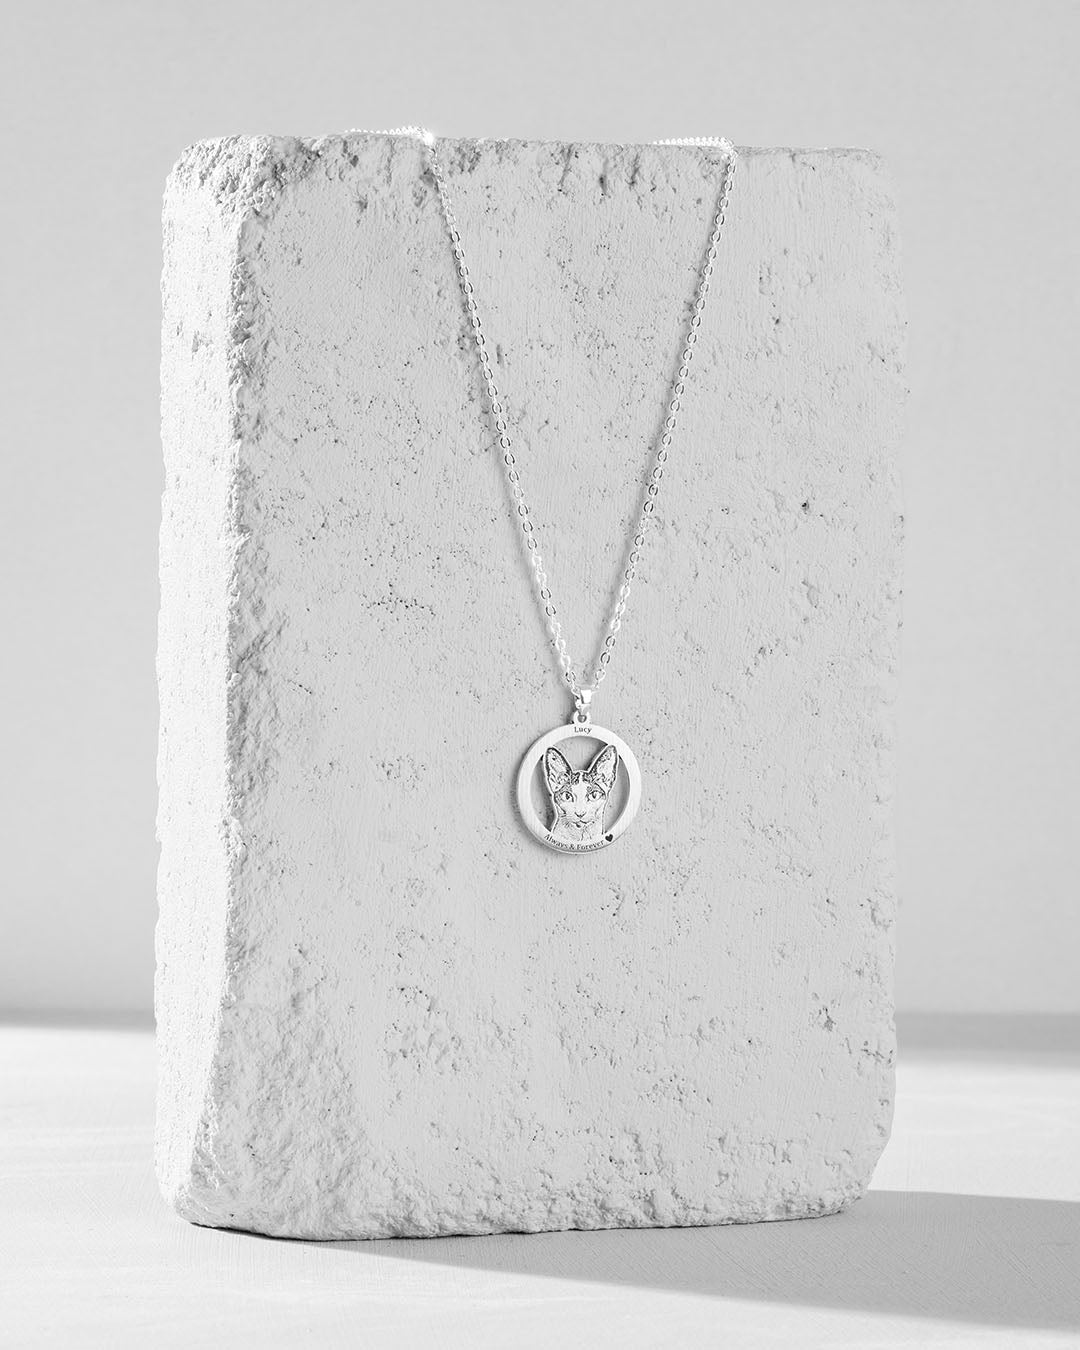 pet memorial gifts, halo cat necklace